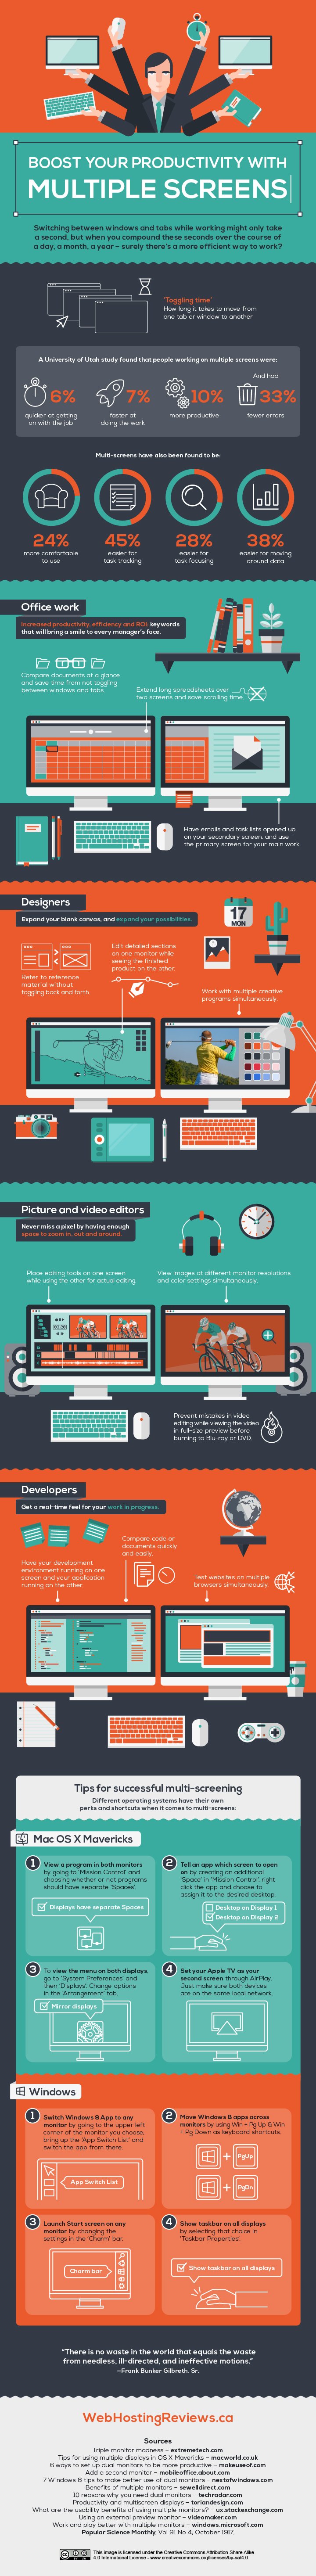 Does Multiple Screens Boost Productivity? [Infographic]